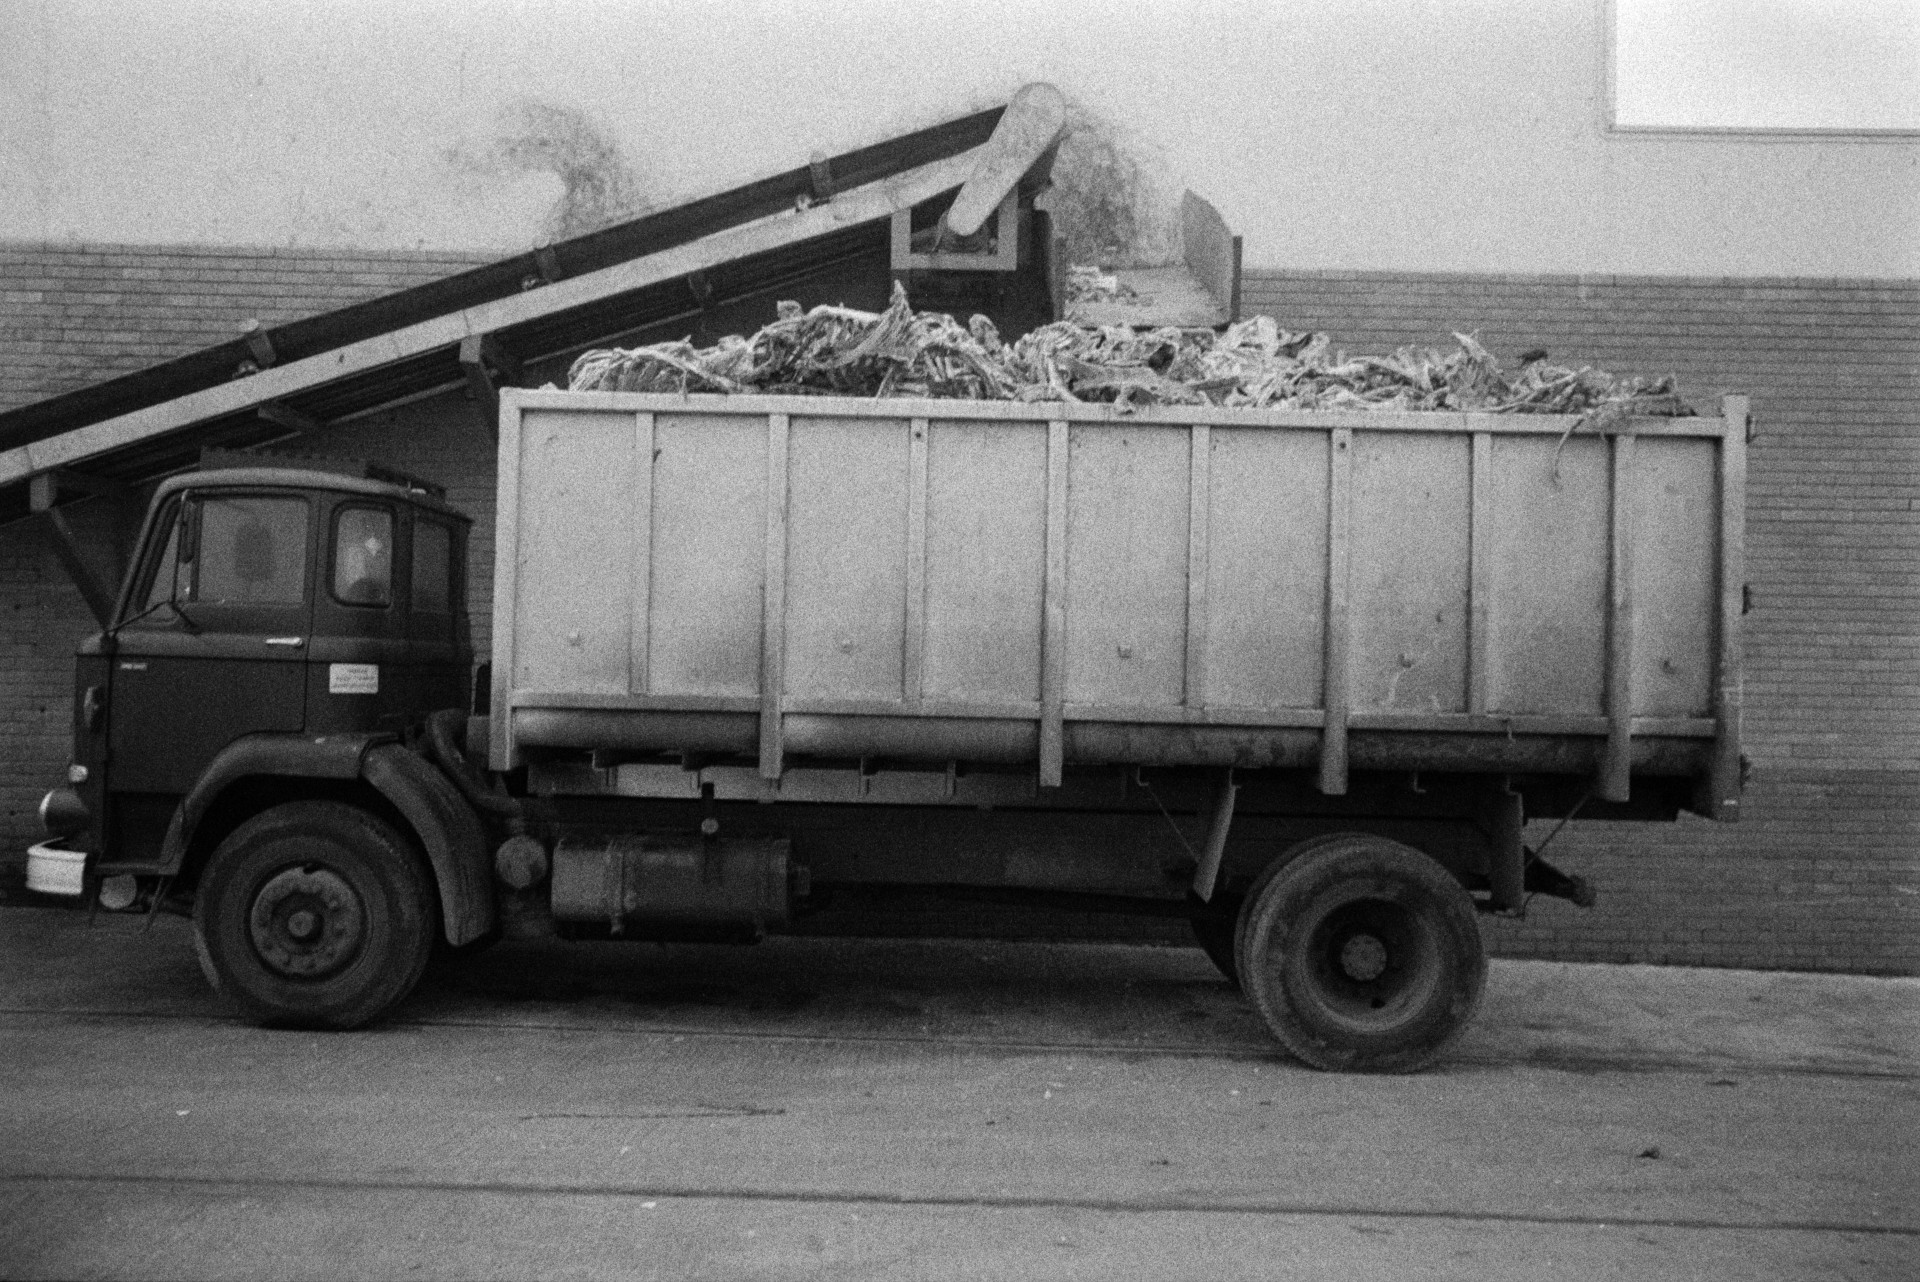 The bone lorry at the North Devon Meat Company in Torrington.